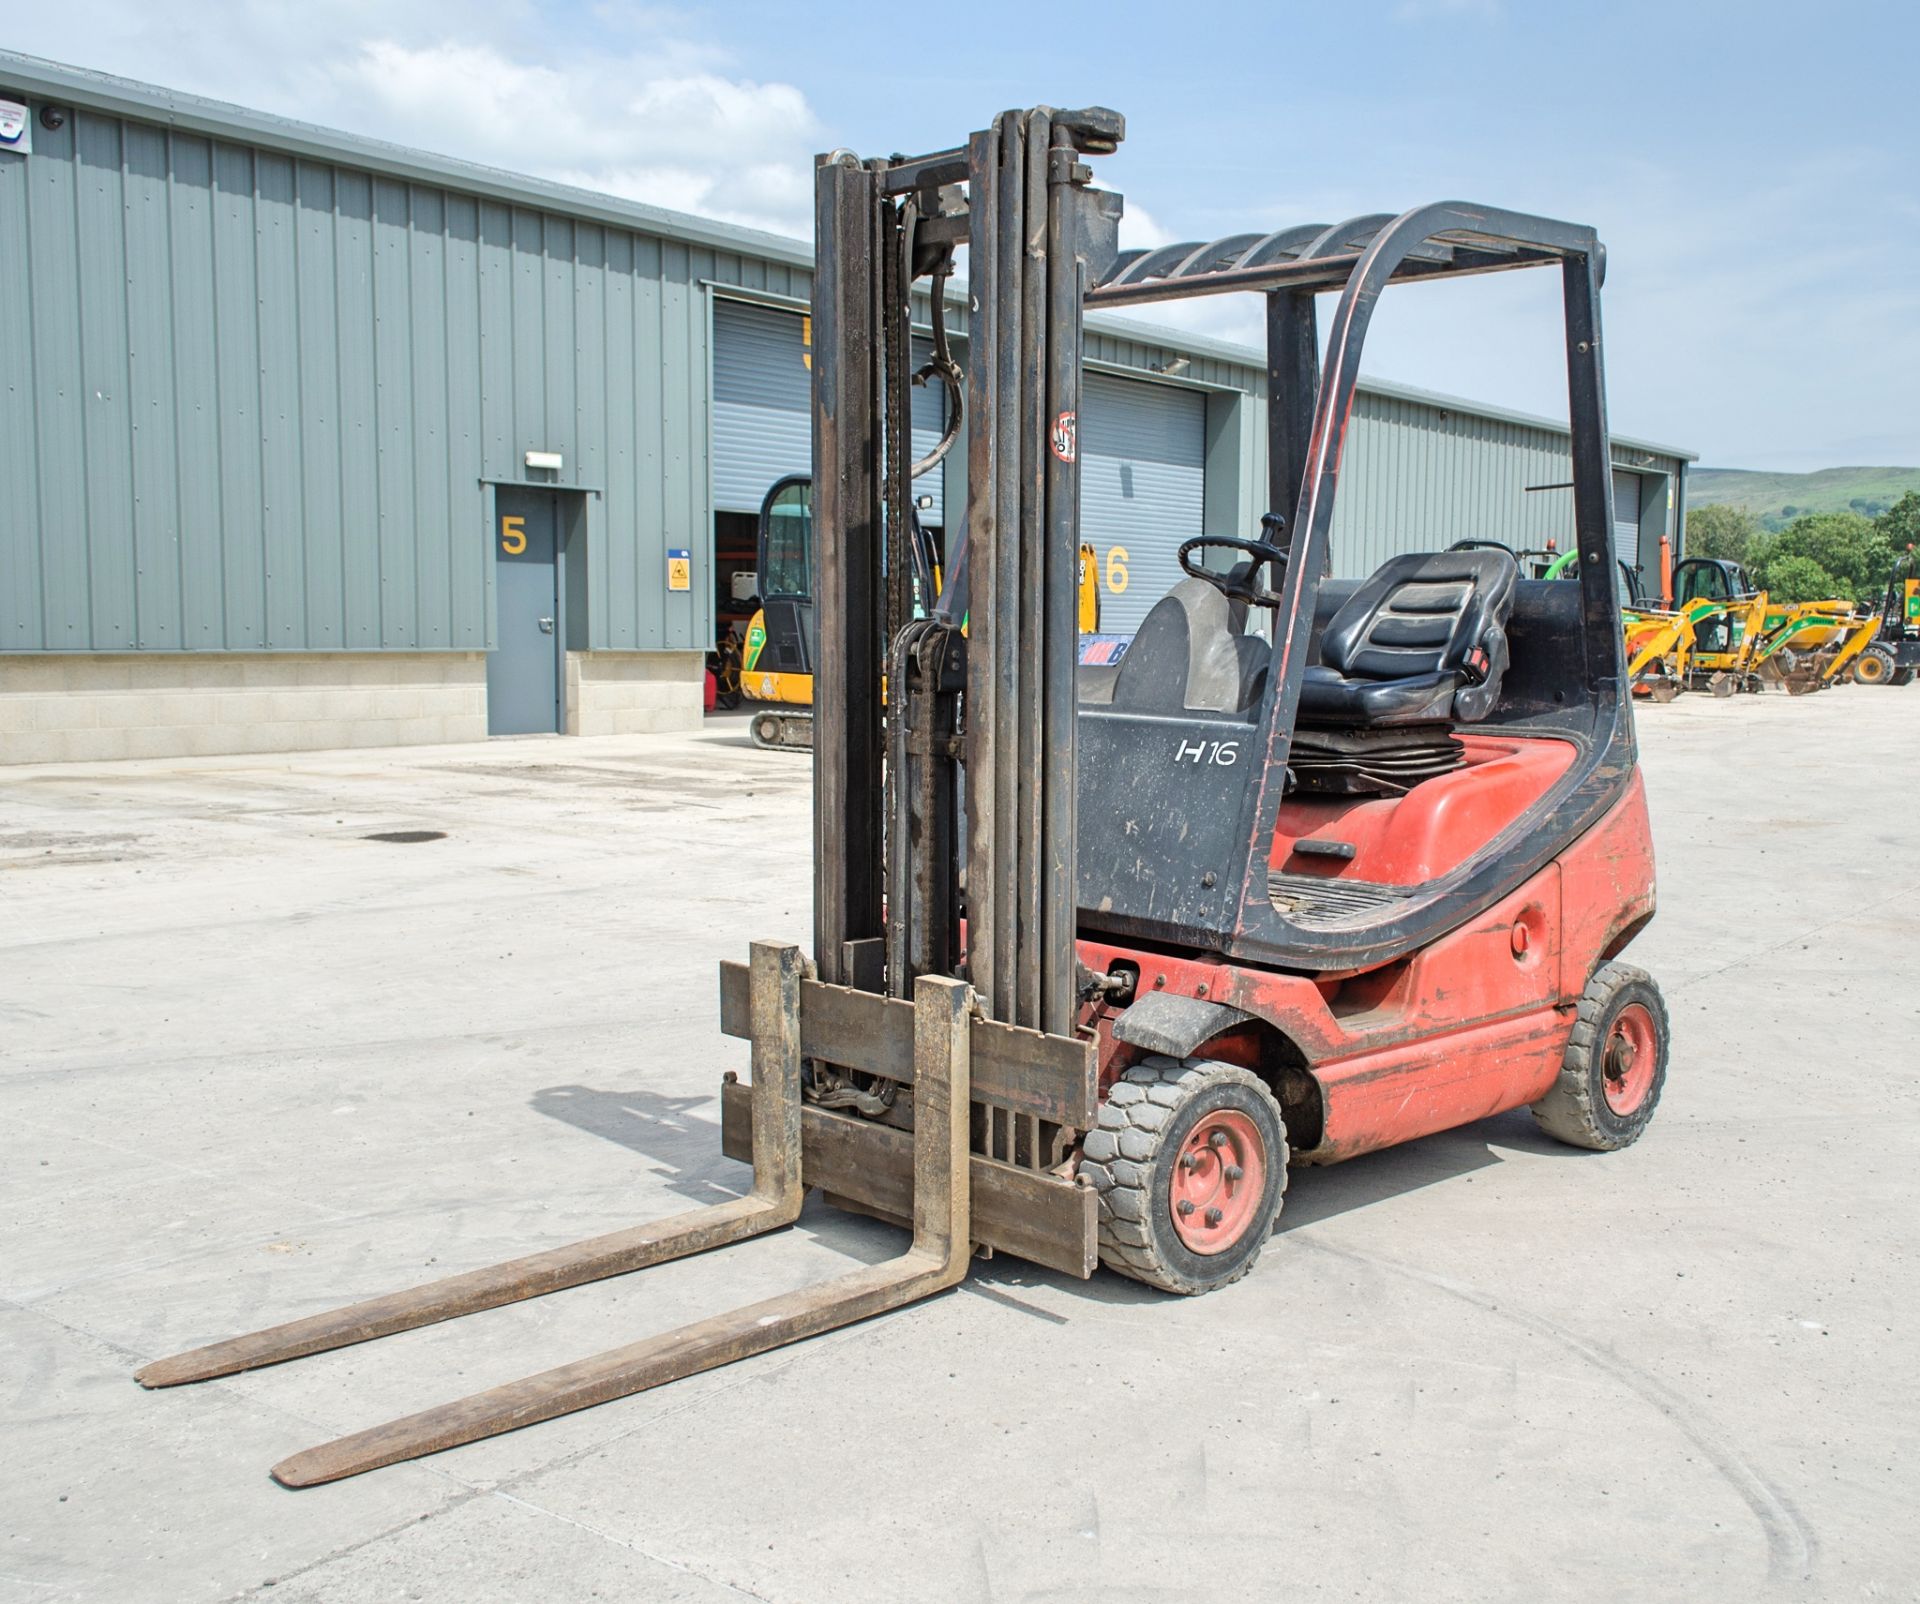 Linde H16 1.6 tonne diesel driven fork lift truck Year: 1992 S/N: 6012116 Recorded Hours: 0677